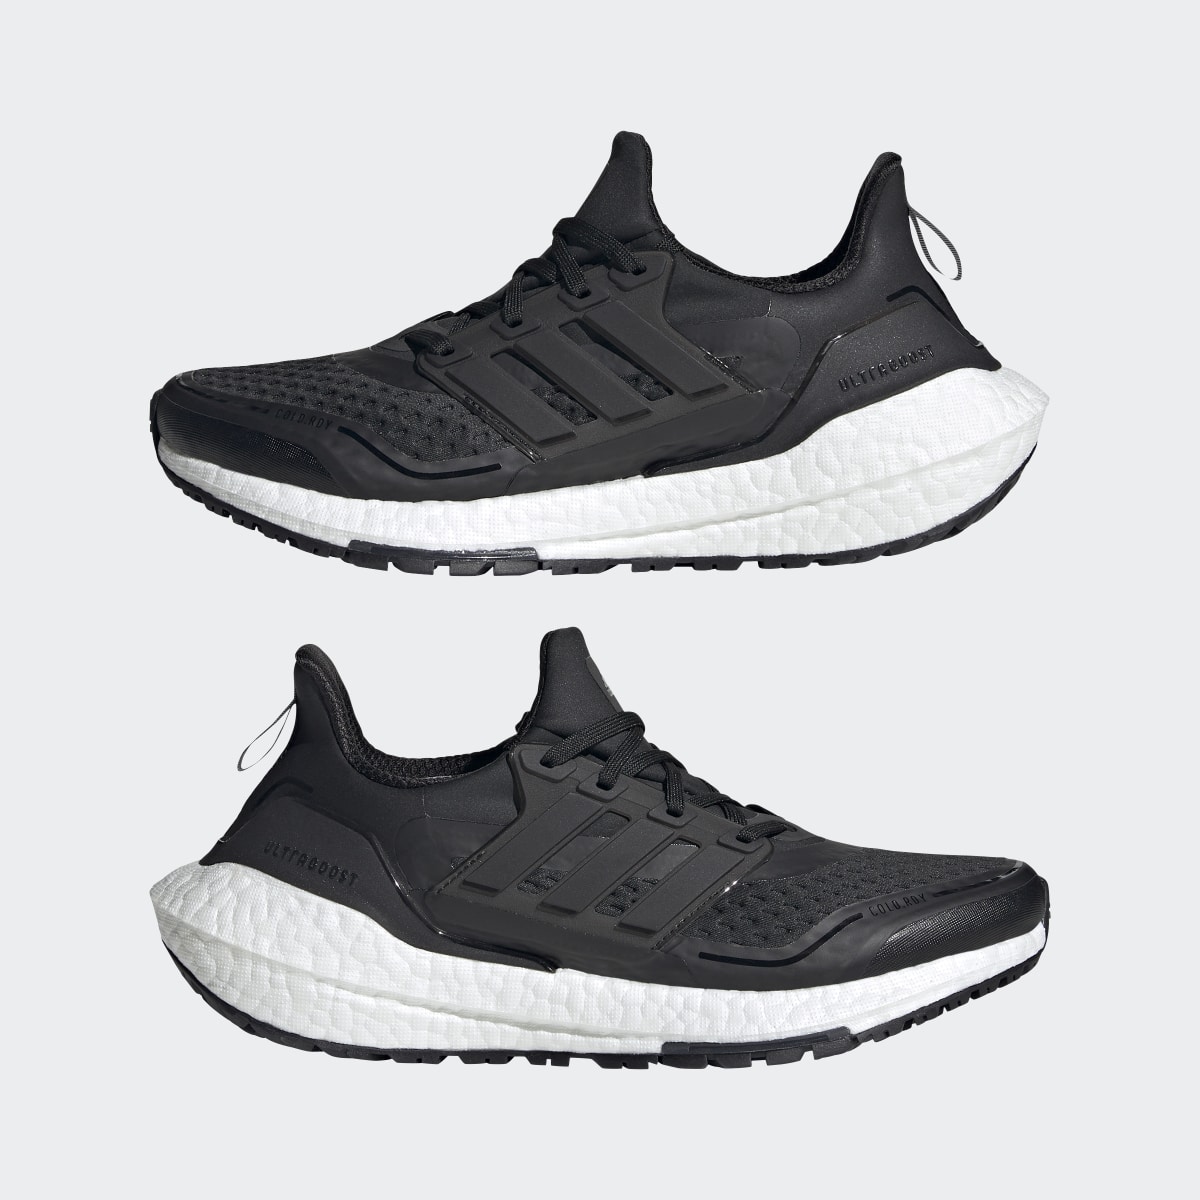 Adidas Ultraboost 21 COLD.RDY Shoes. 8